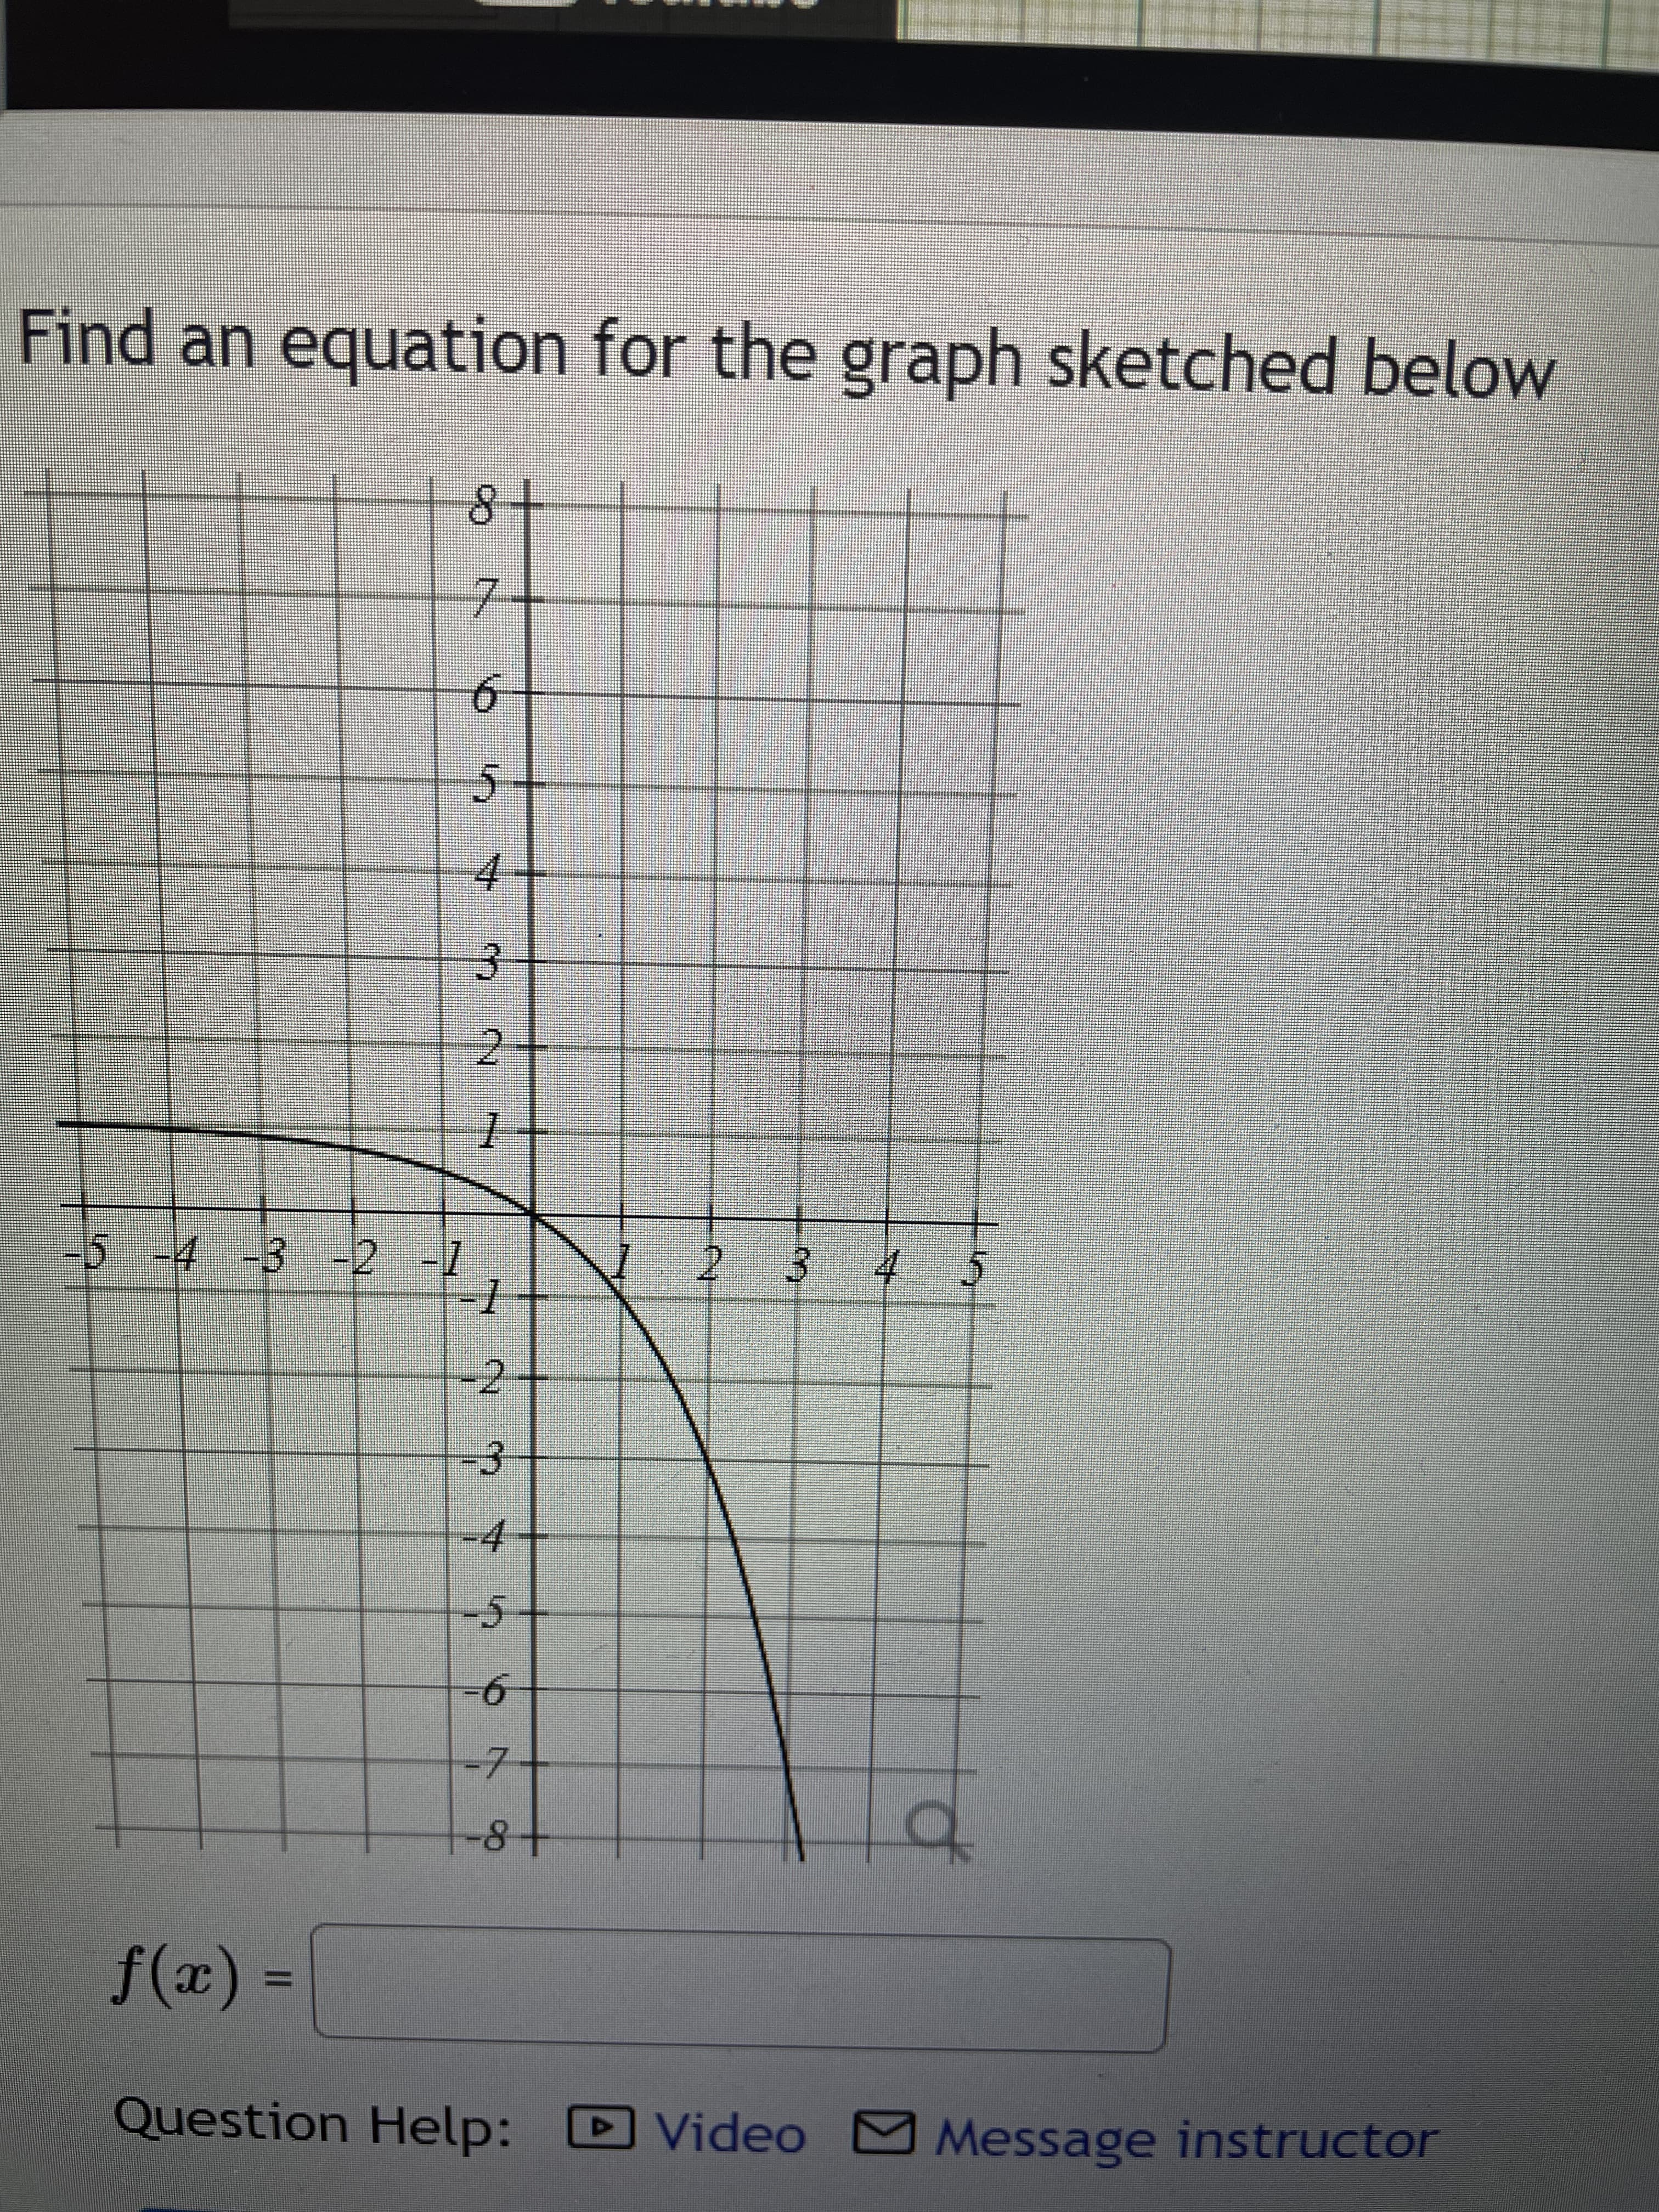 Find an equation for the graph sketched below
8
7
6
-5 -4 -3 -2 -1
5
4
3
2
1
-2
بن
-5
=6
-7
-8+
2 3
4
f(x) =
Question Help: Video Message instructor